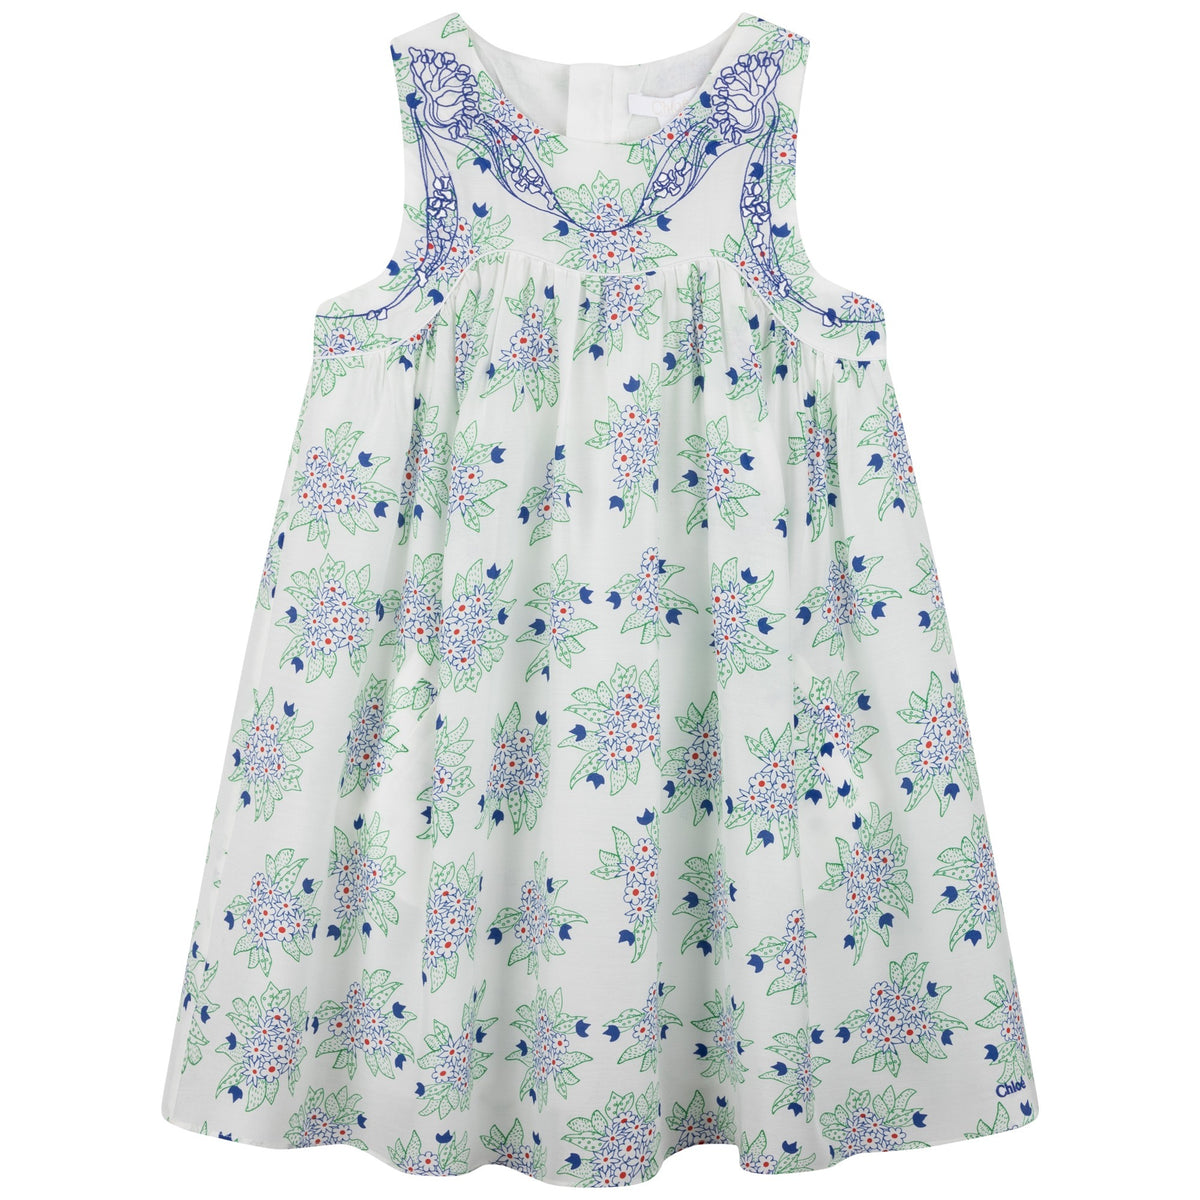 Sleeveless Dress with Flower Print all over